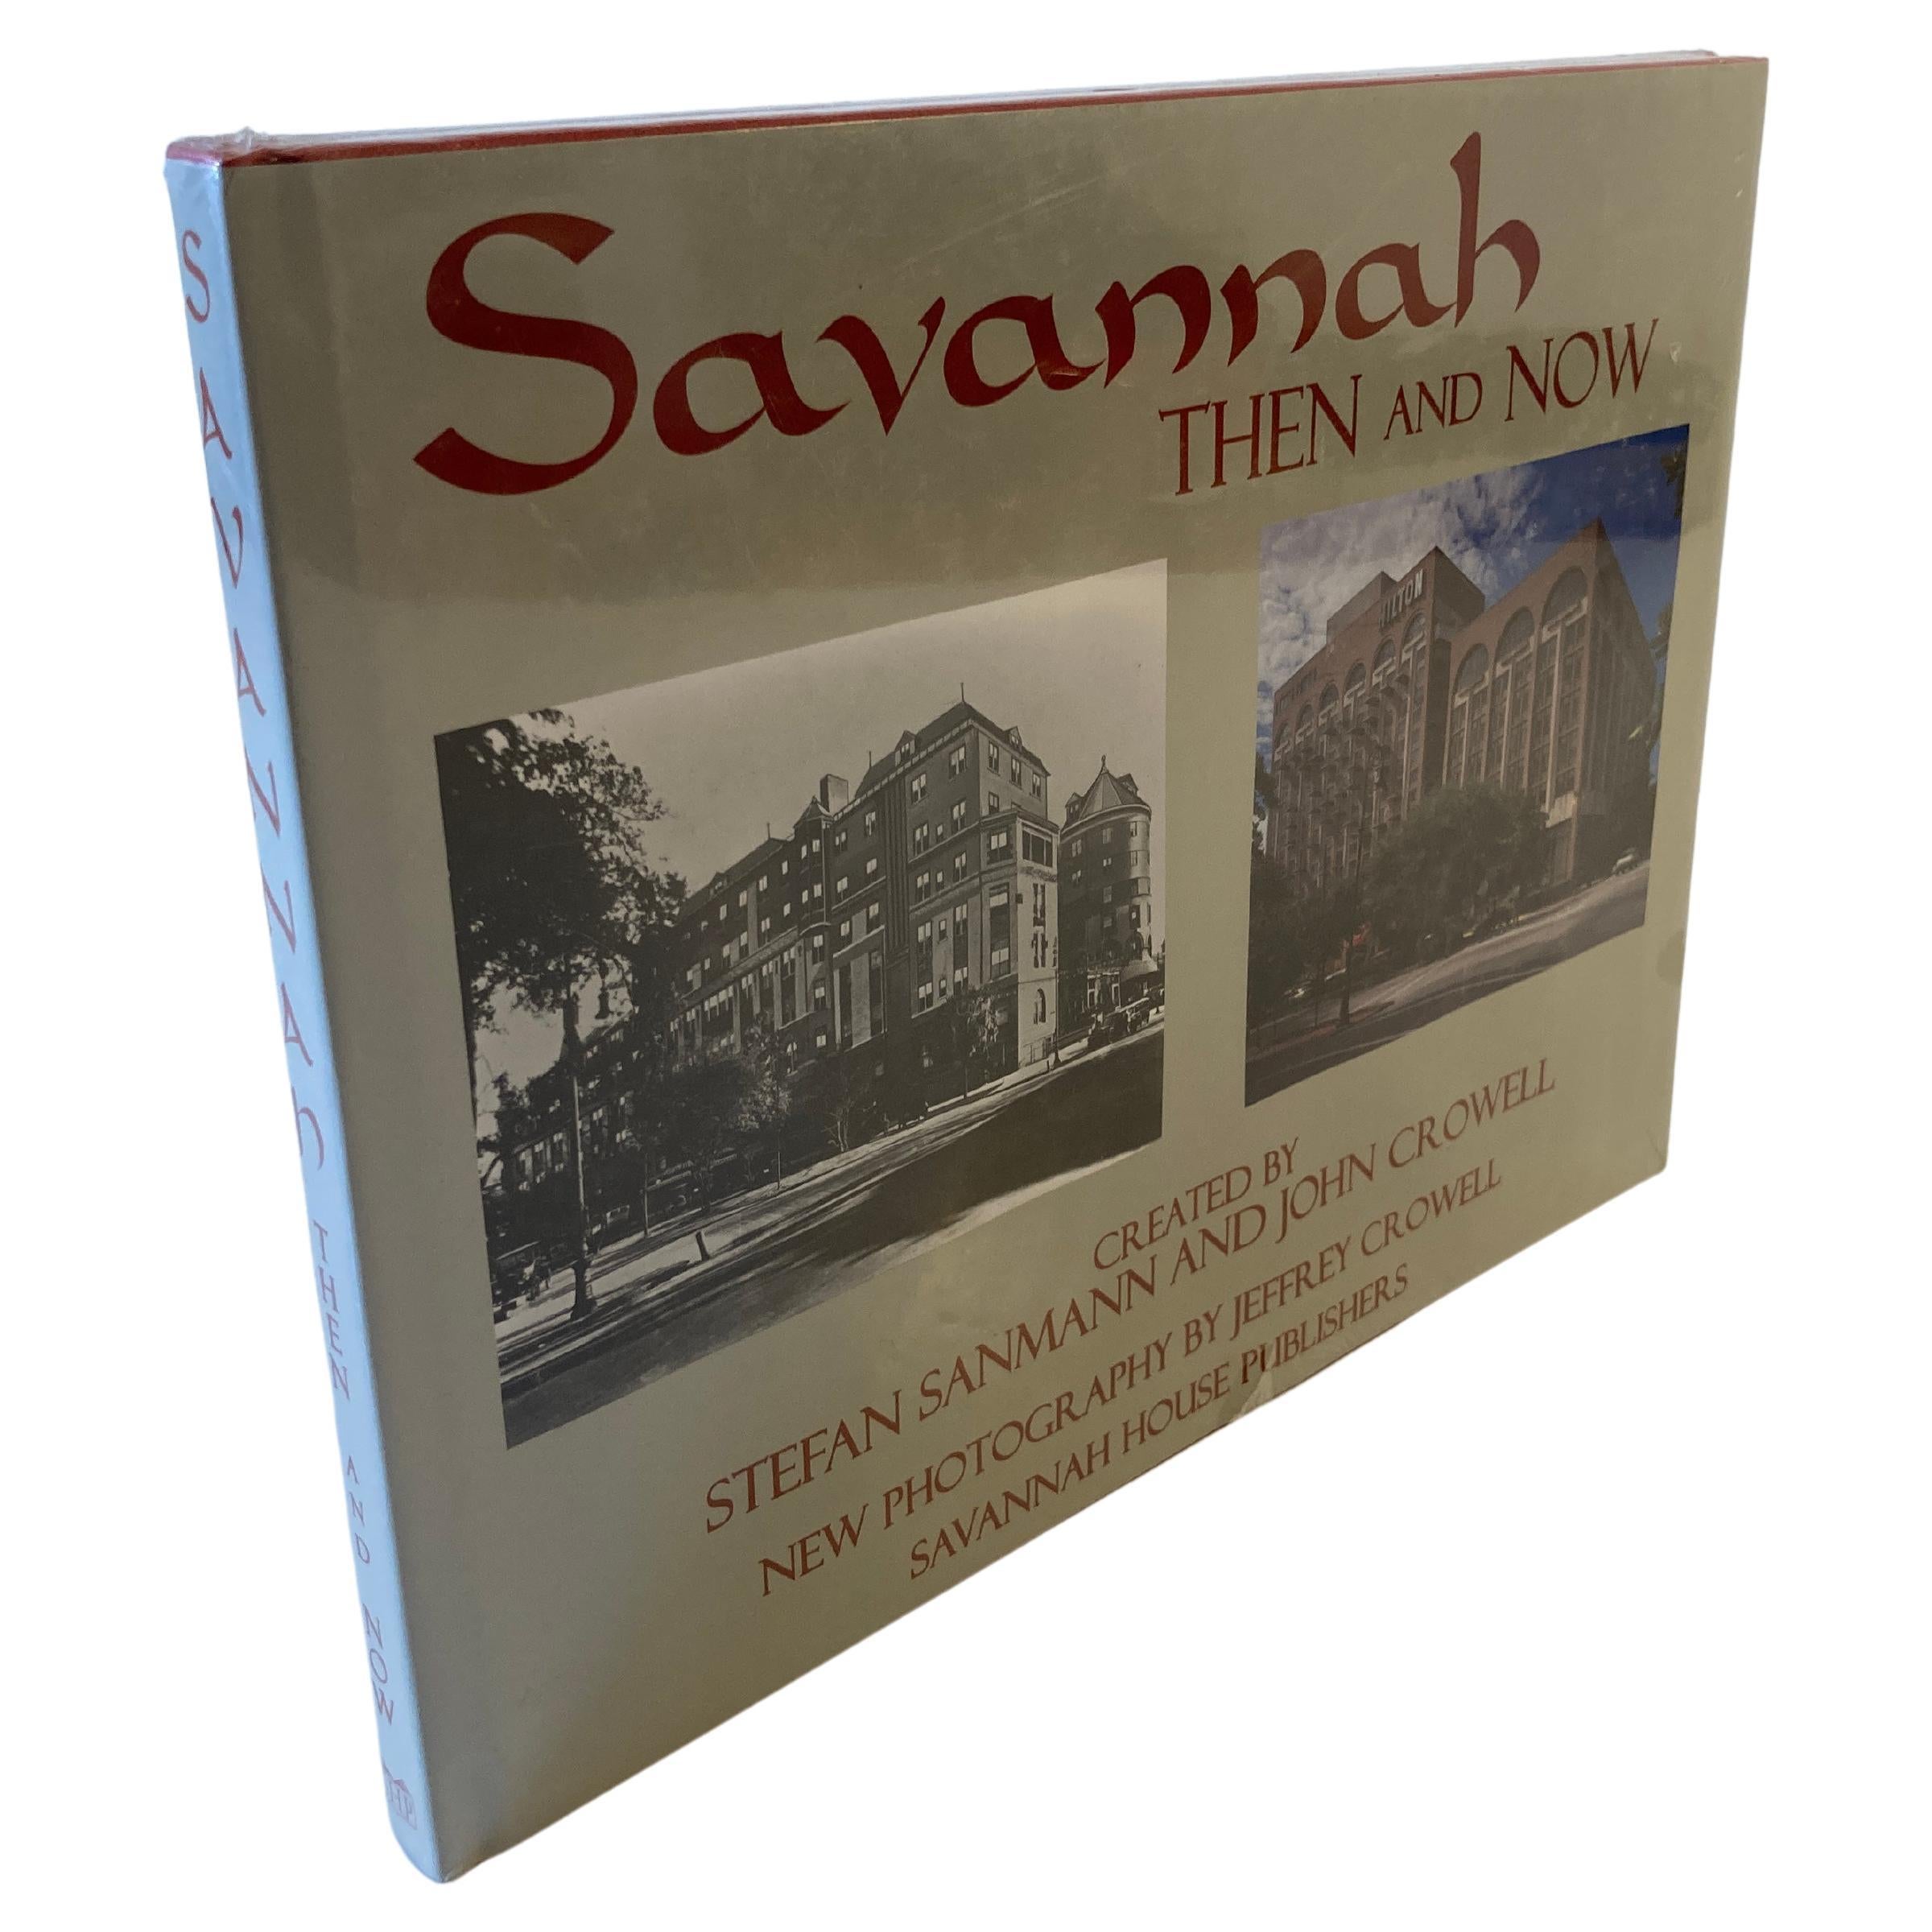 Savannah Then and Now by Stefan Sanmann and John Crowell Hardcover Book For Sale